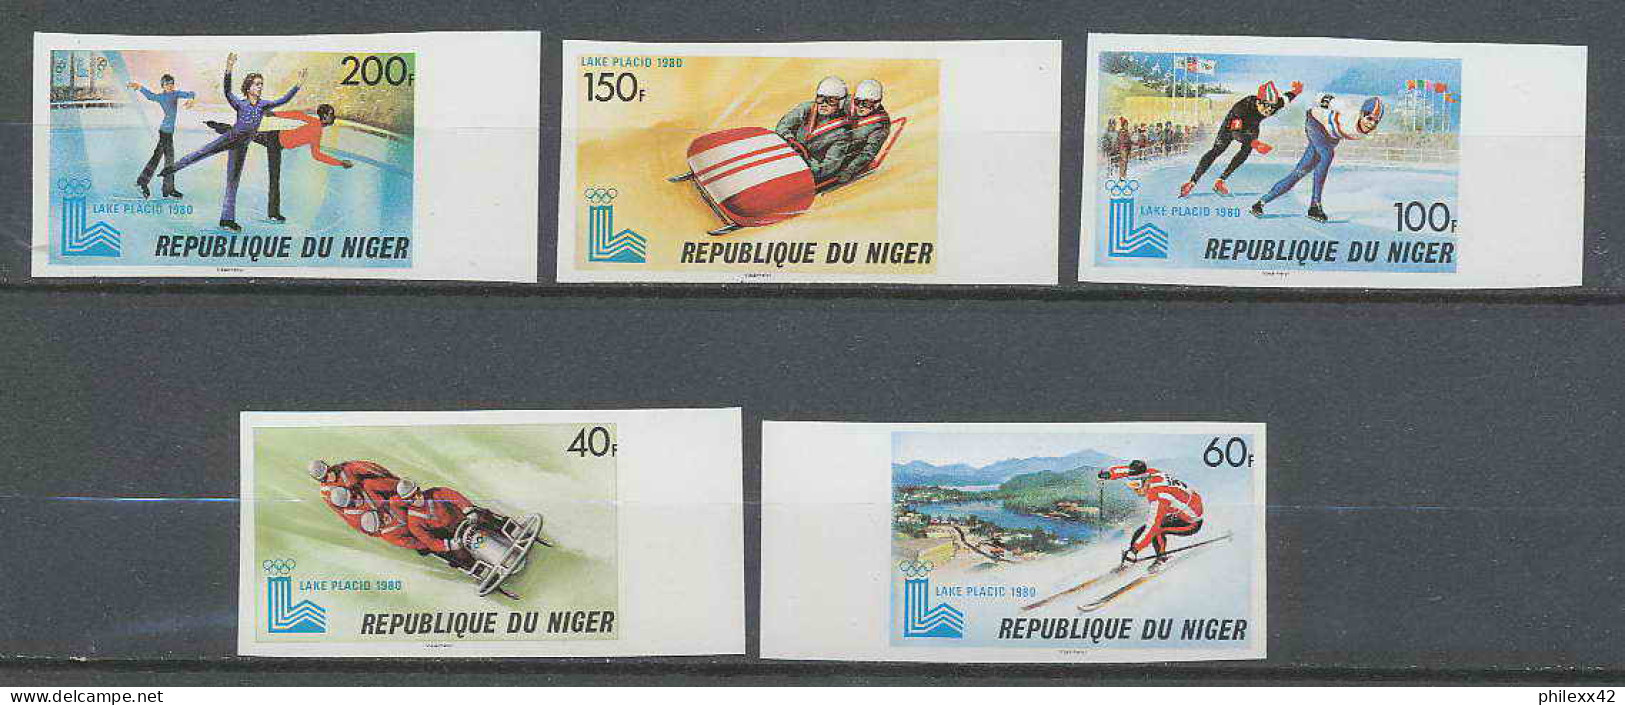 Niger 027a N°492/496 Non Dentelé Imperf Jeux Olympiques Olympic Games Lake Placid 80 MNH ** - Inverno1980: Lake Placid